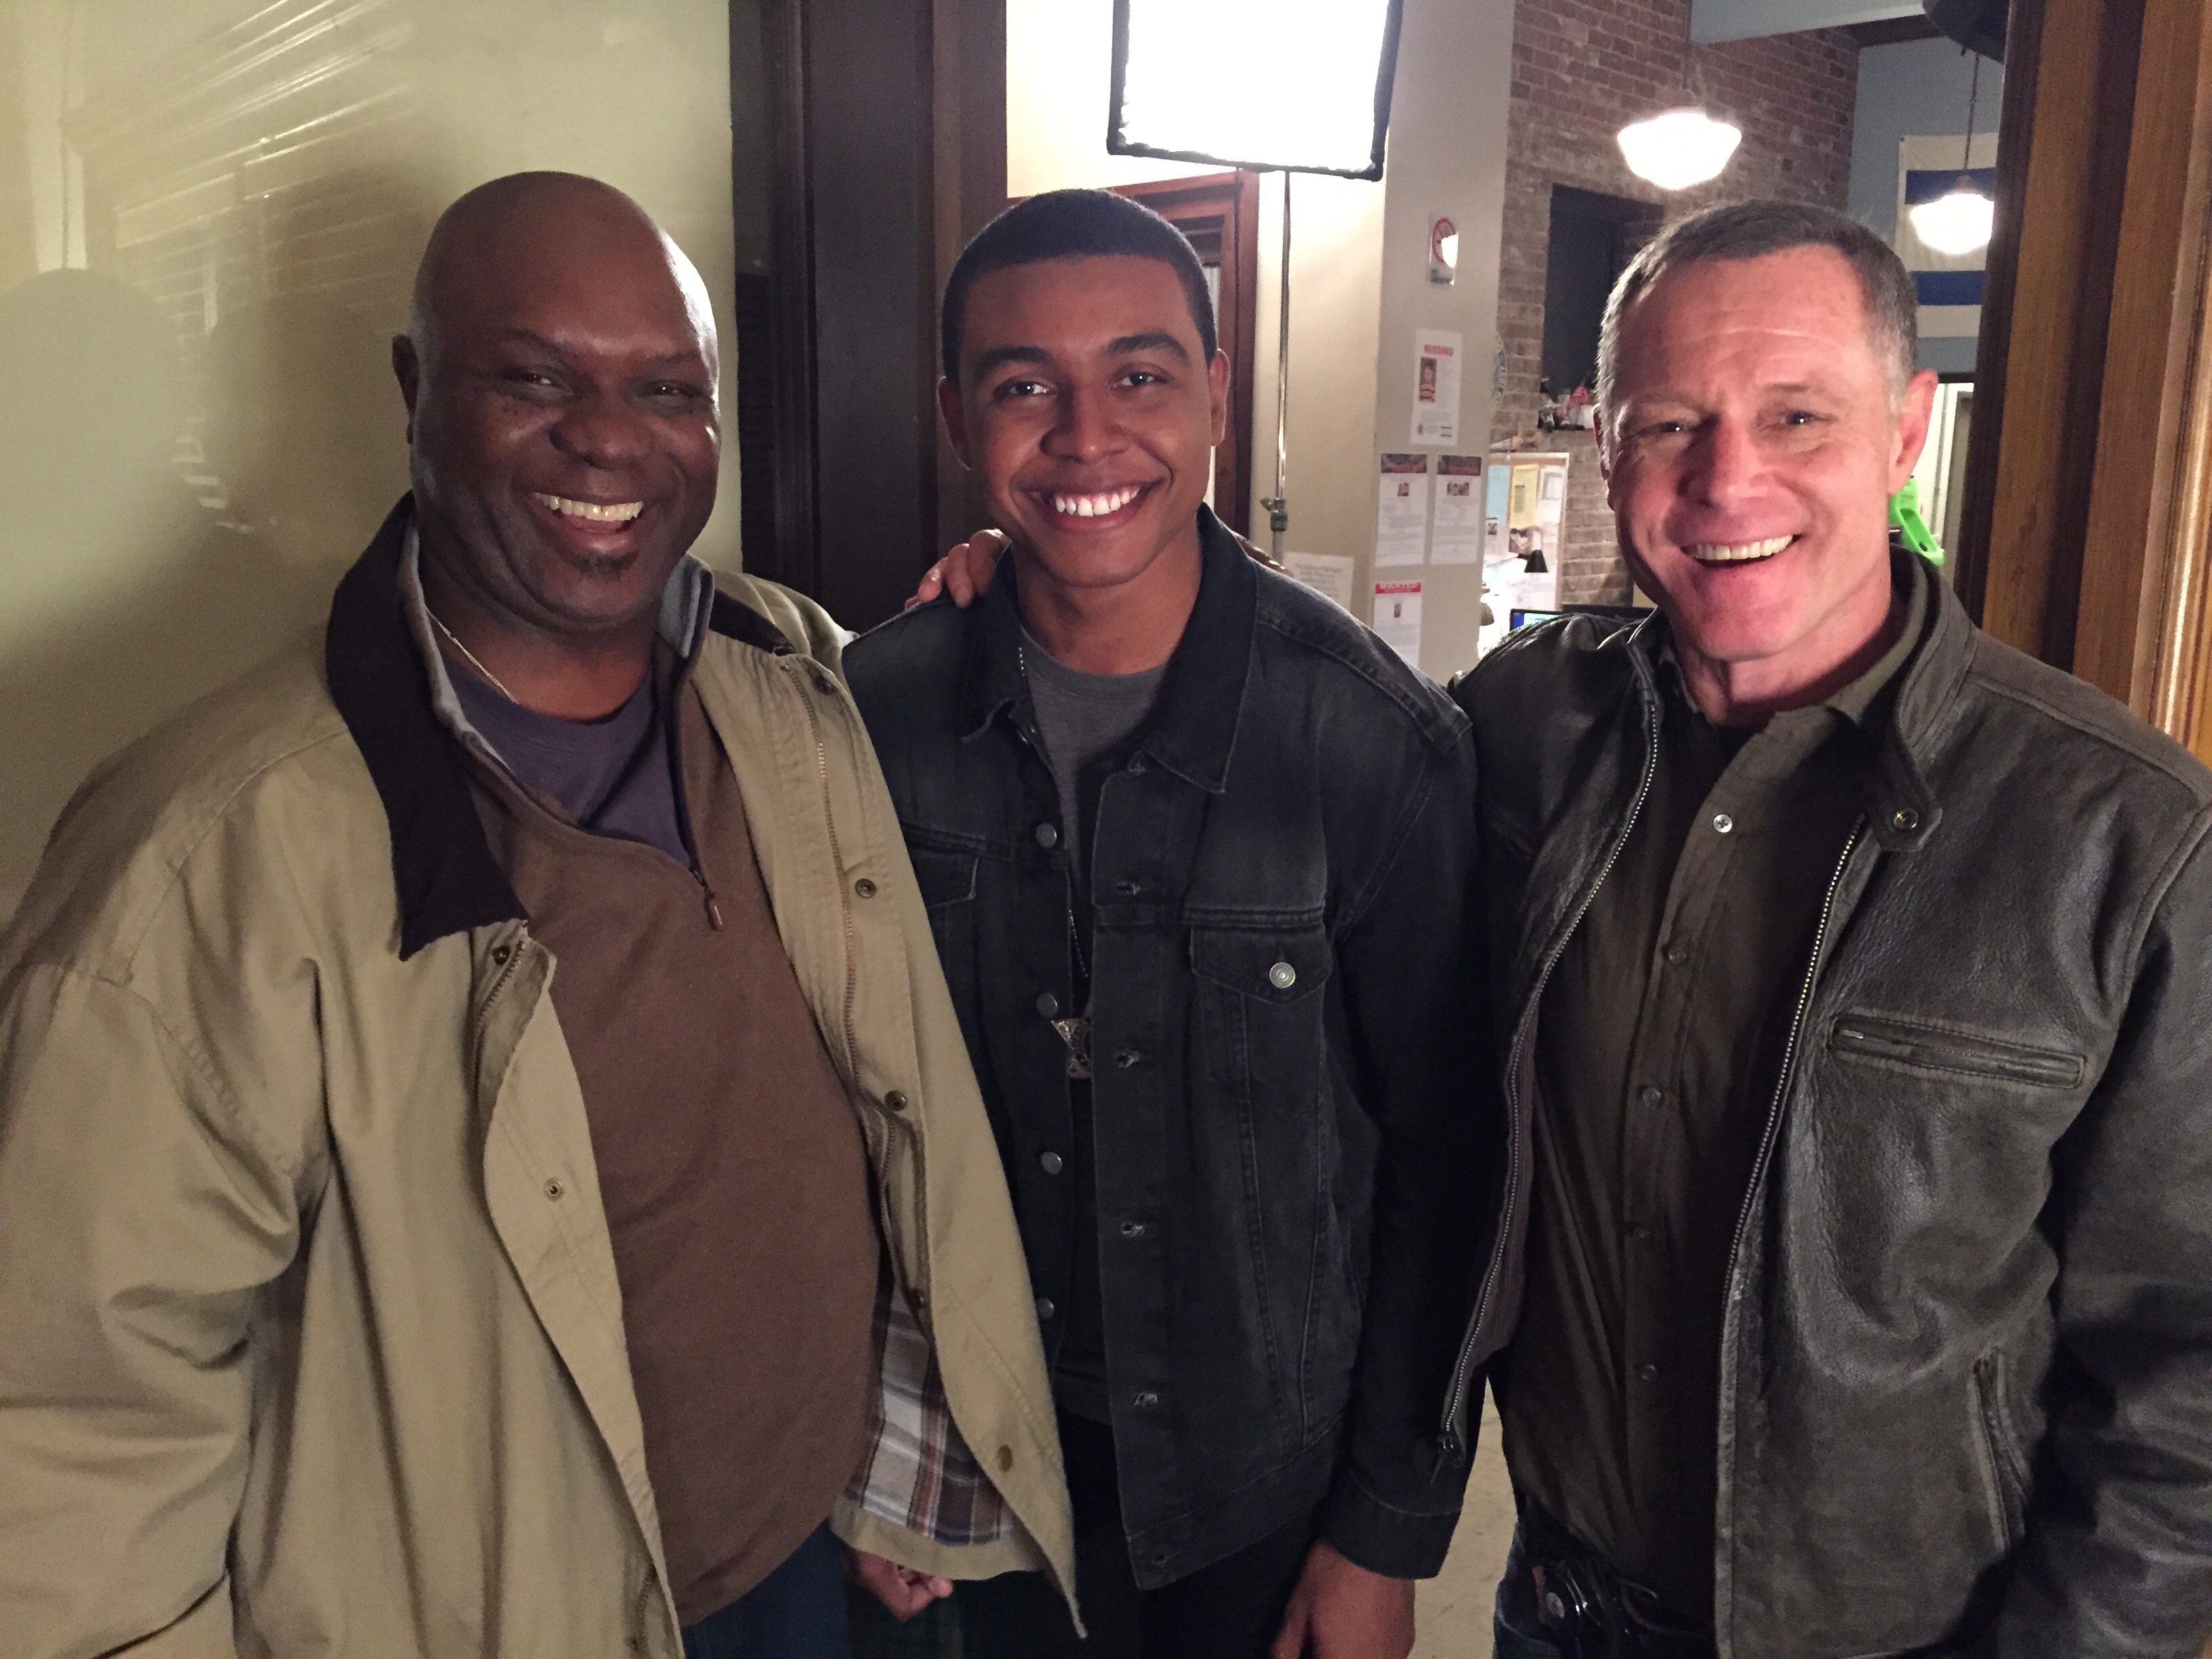 Joseph Anderson with Robert Wisdom and Jason Beghe on set of the season finale for Chicago P.D.